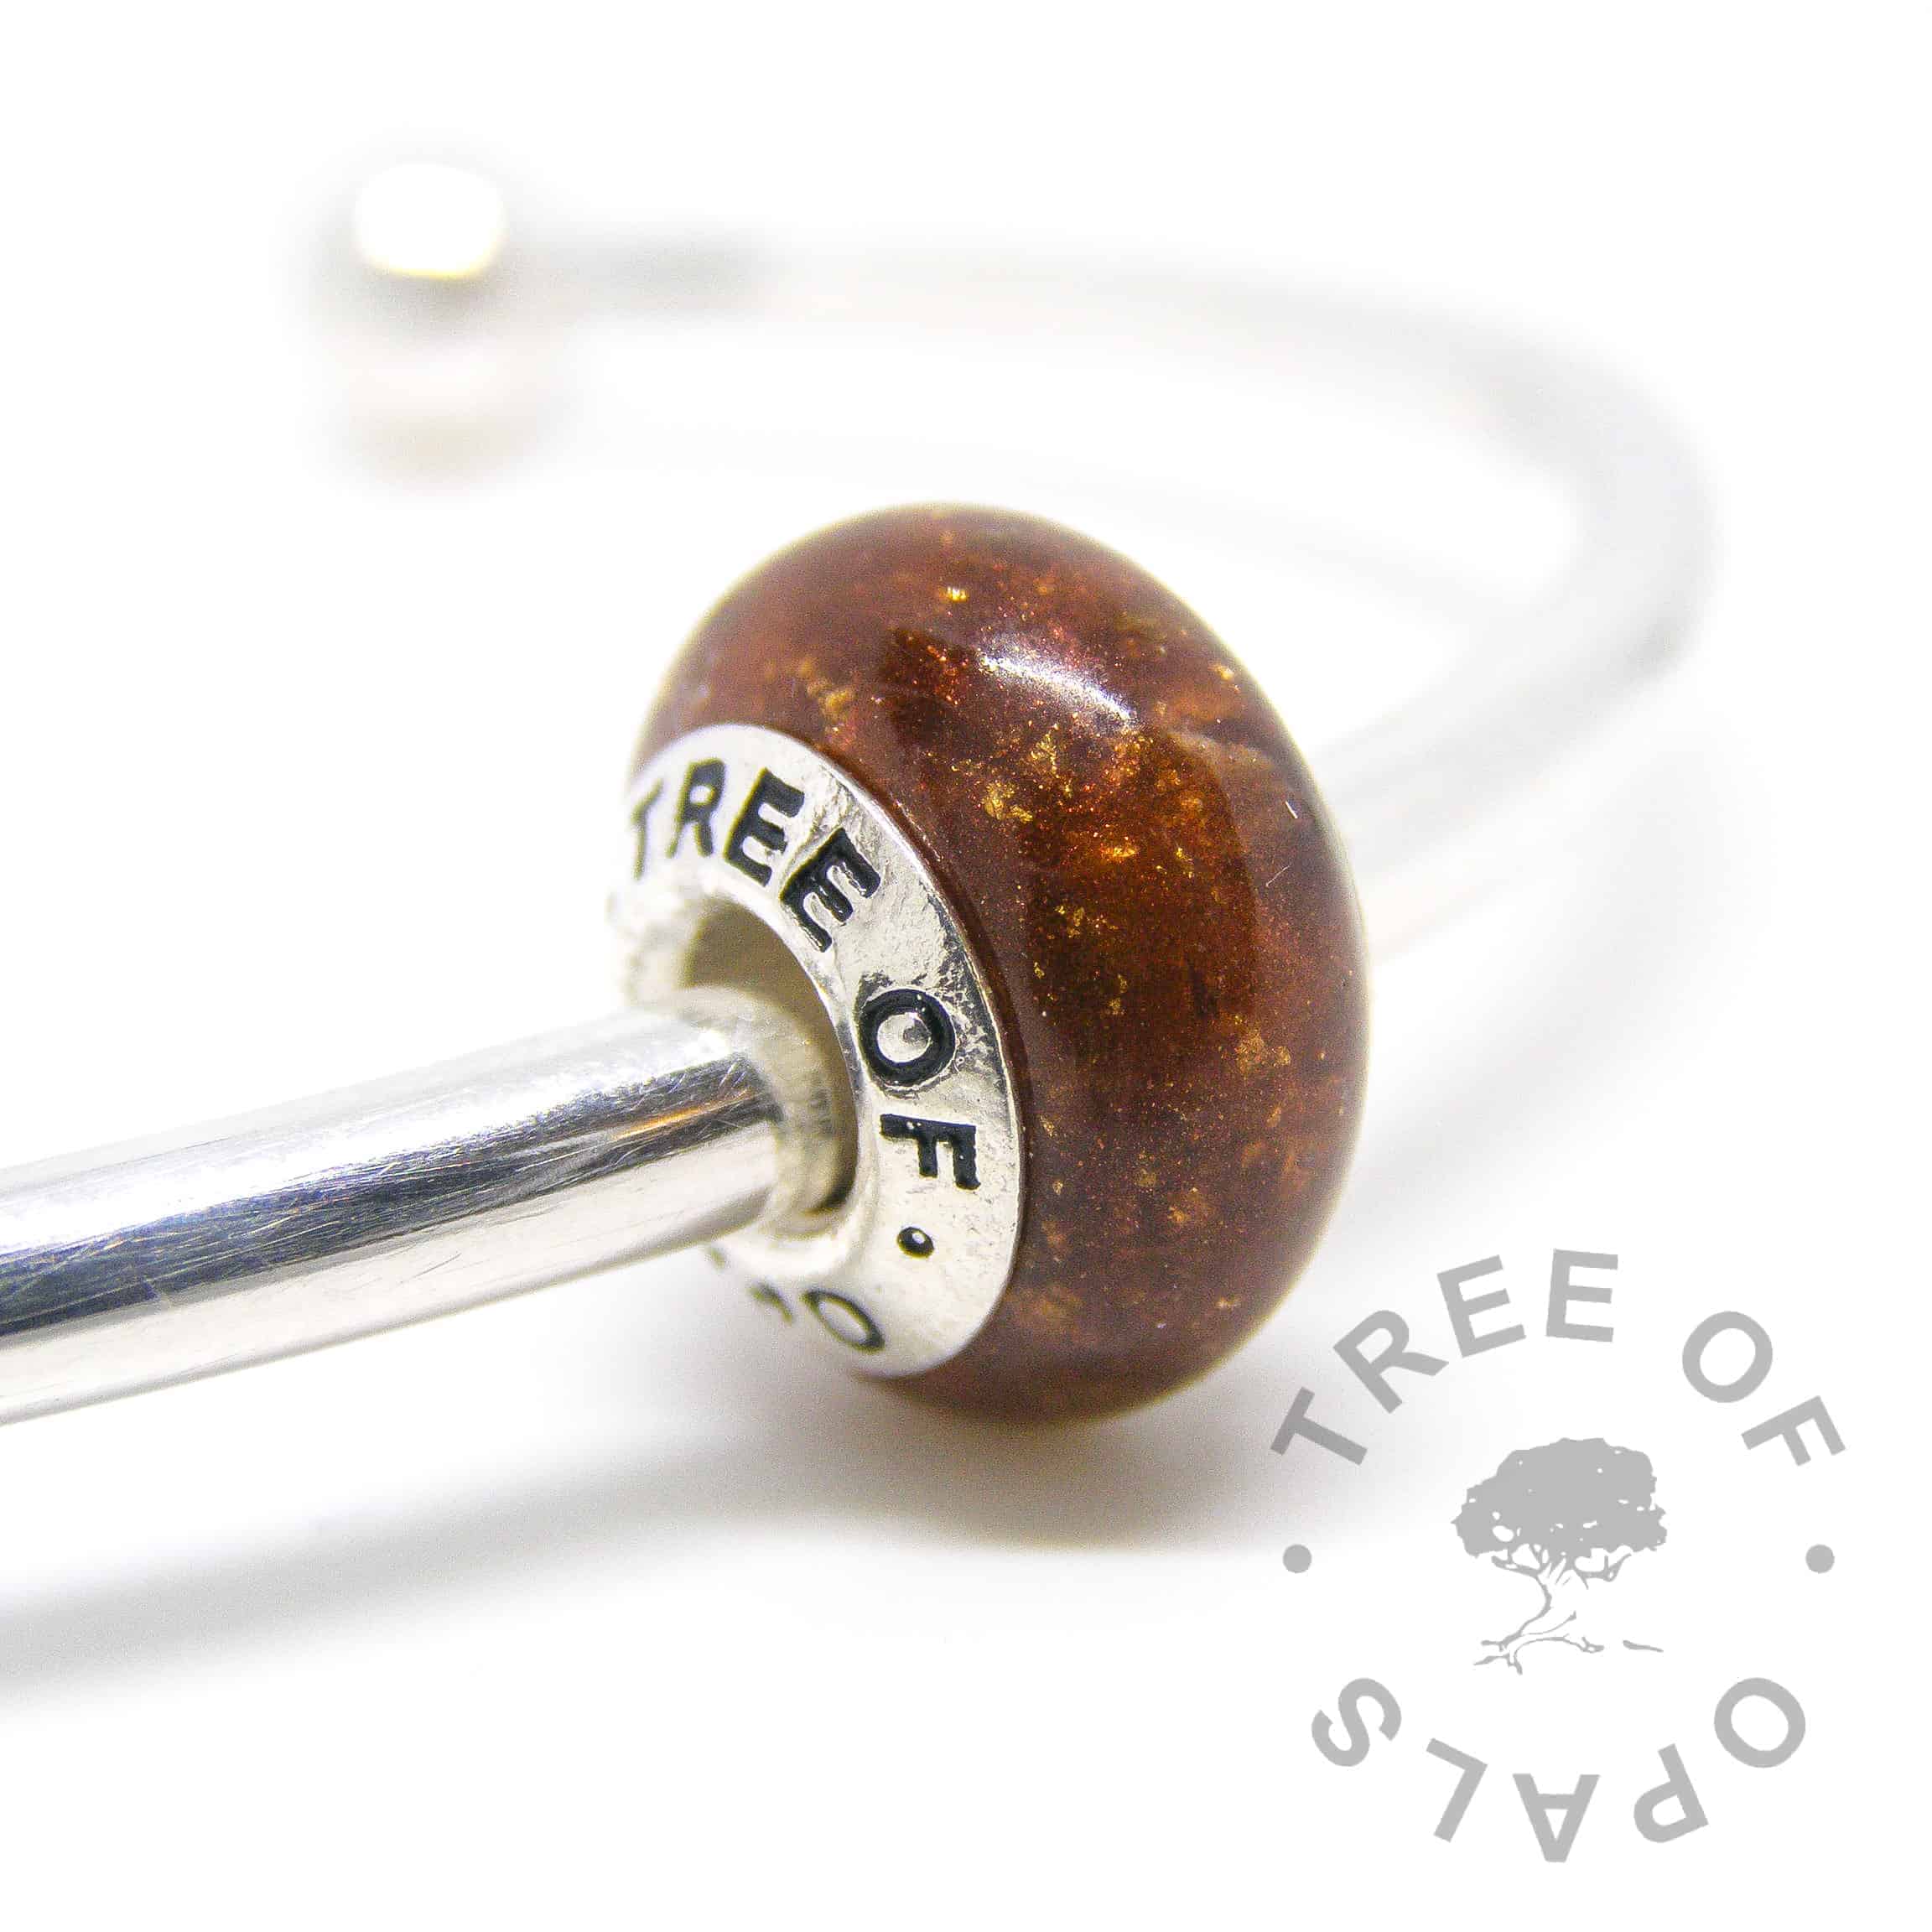 umbilical cord placenta bead in resin, genuine rose gold leaf and bronze shimmer with a solid sterling silver Tree of Opals branded core umbilical cord charm